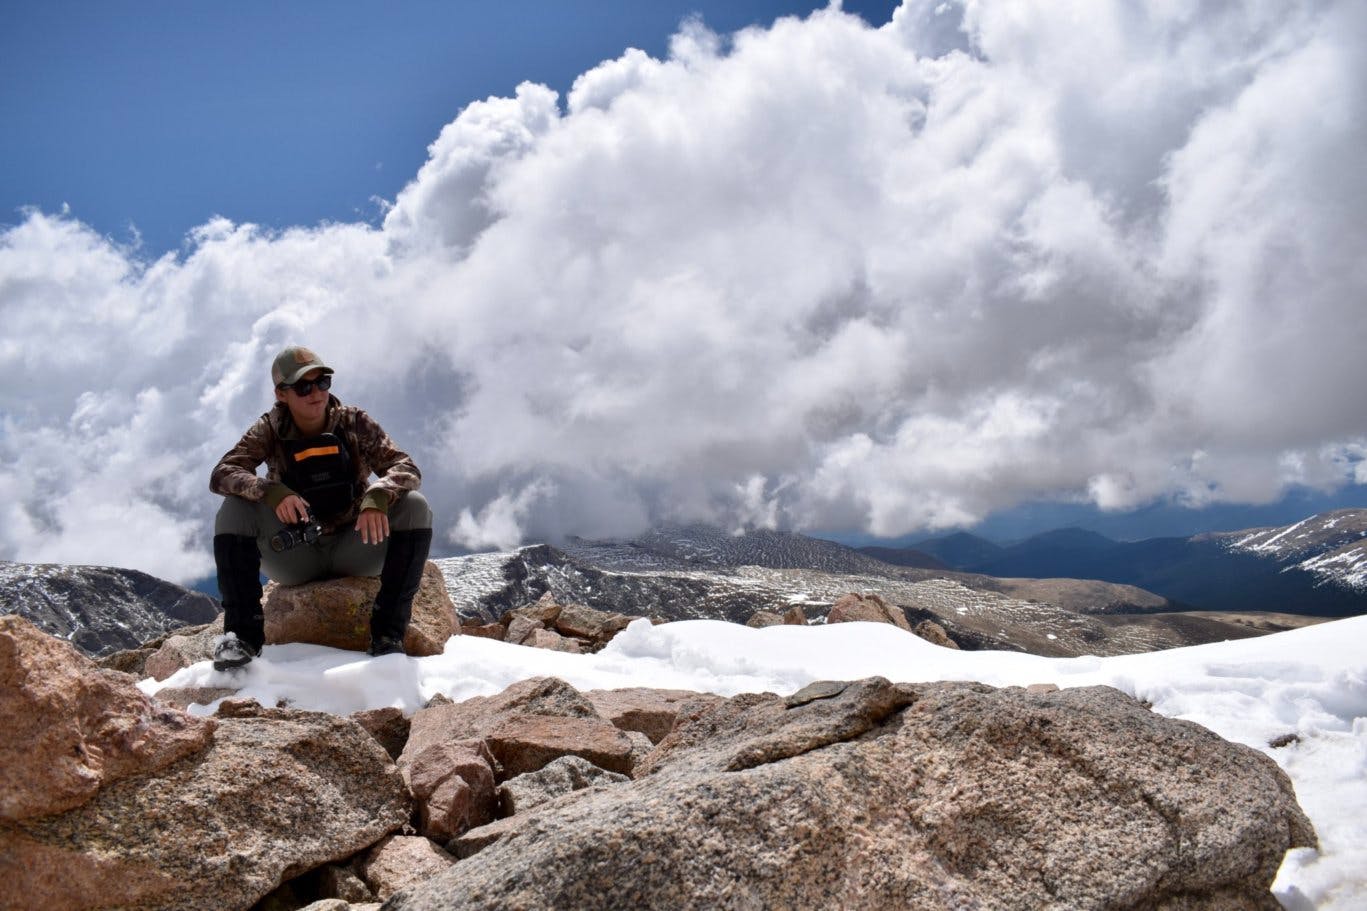 A hiker sitting on a rock on a snowy mountain summit with white puffy clouds in the background